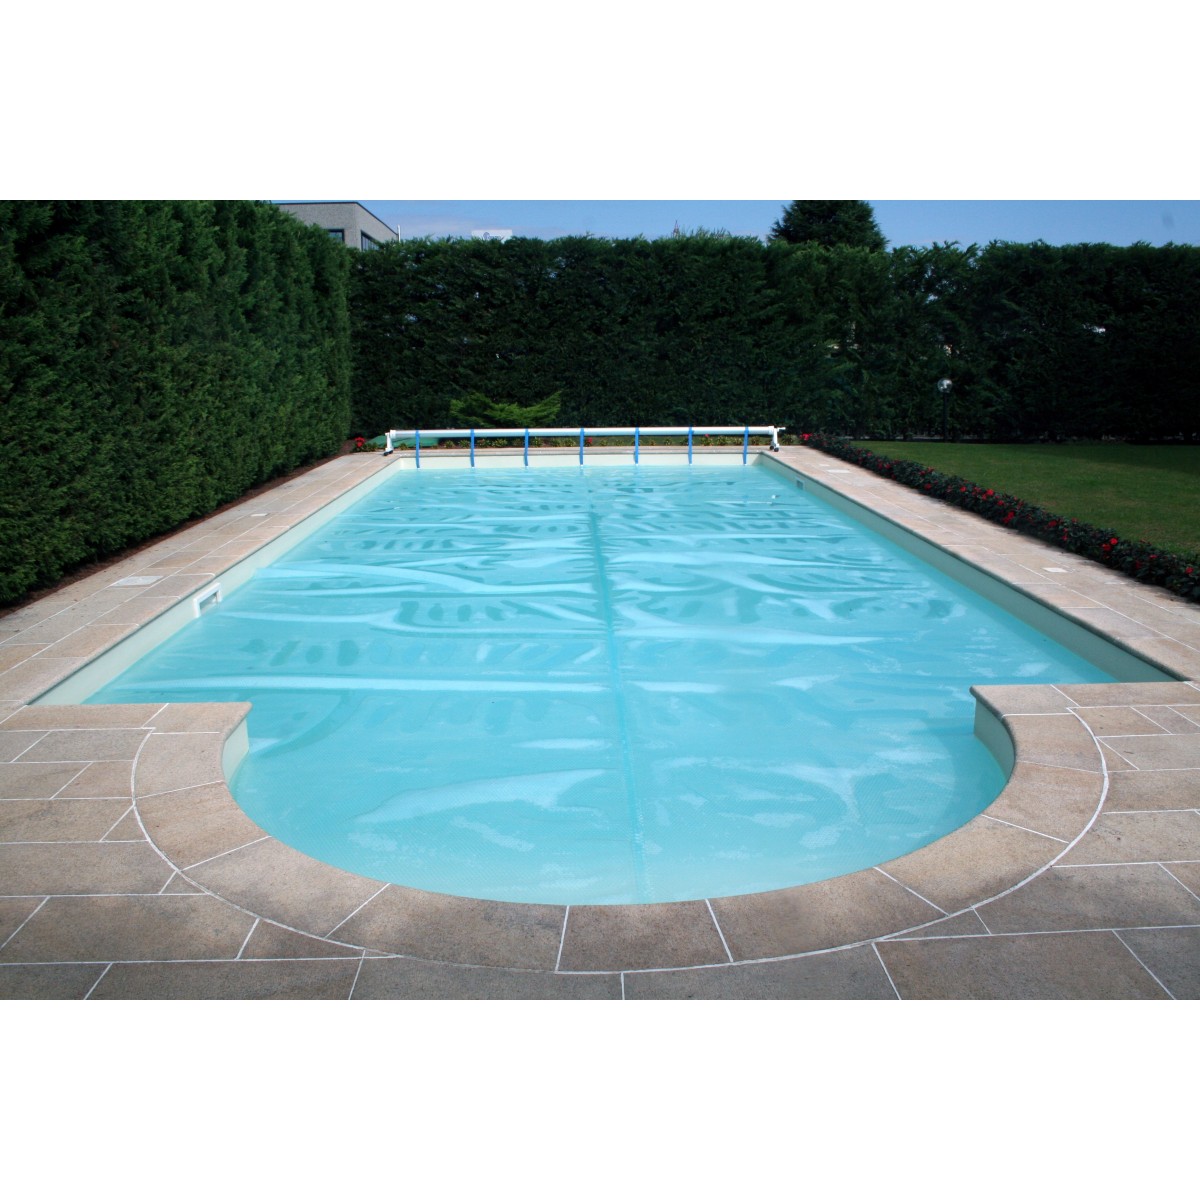 Isothermal cover Sunguard De Lux - size 4x9